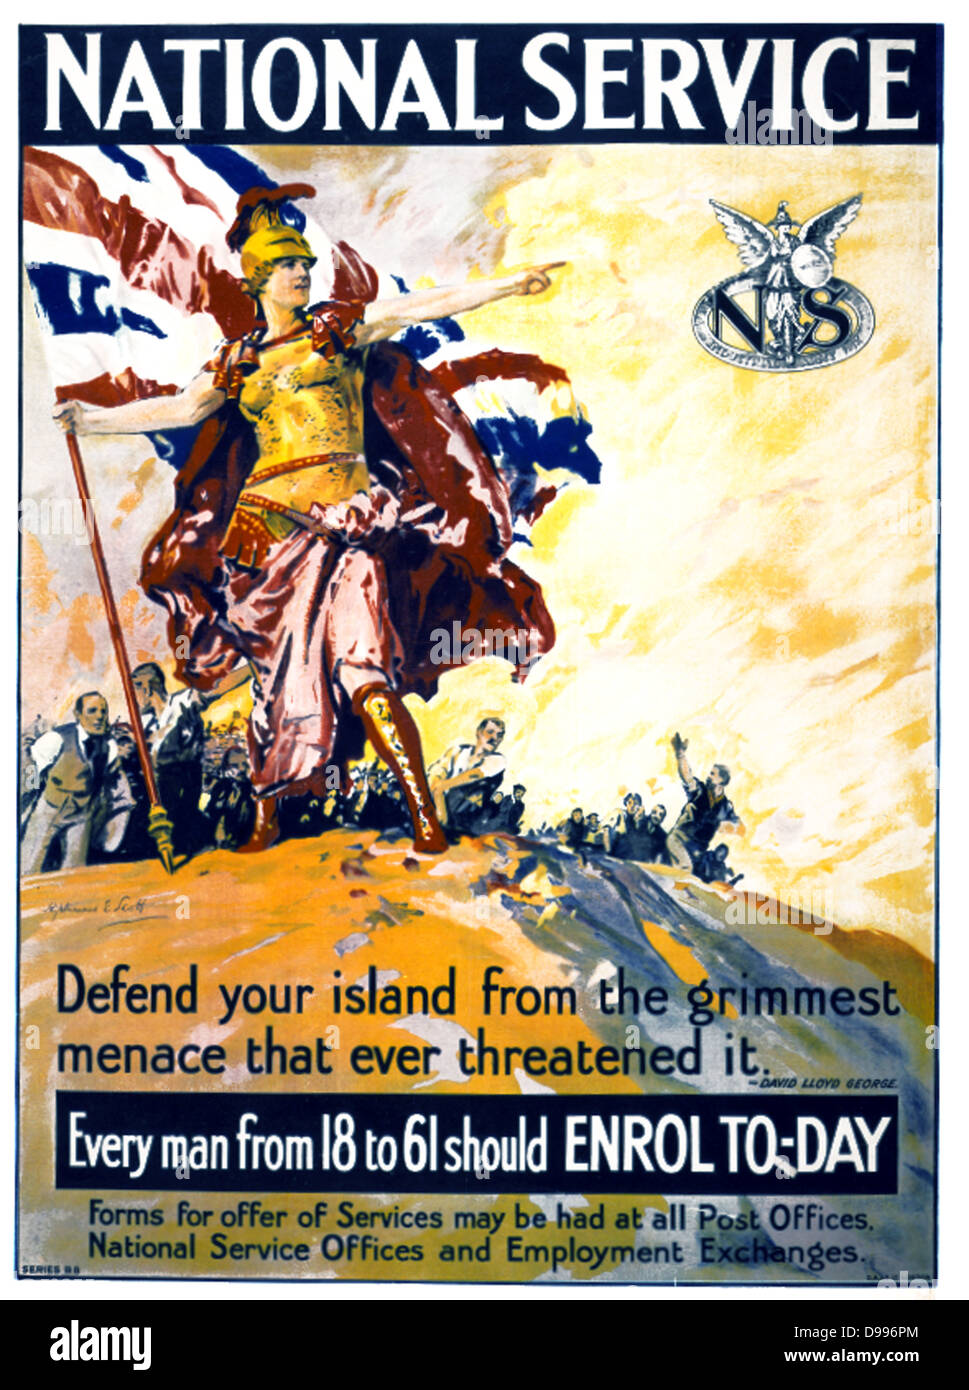 images hi-res - photography world First Alamy recruitment poster stock war and